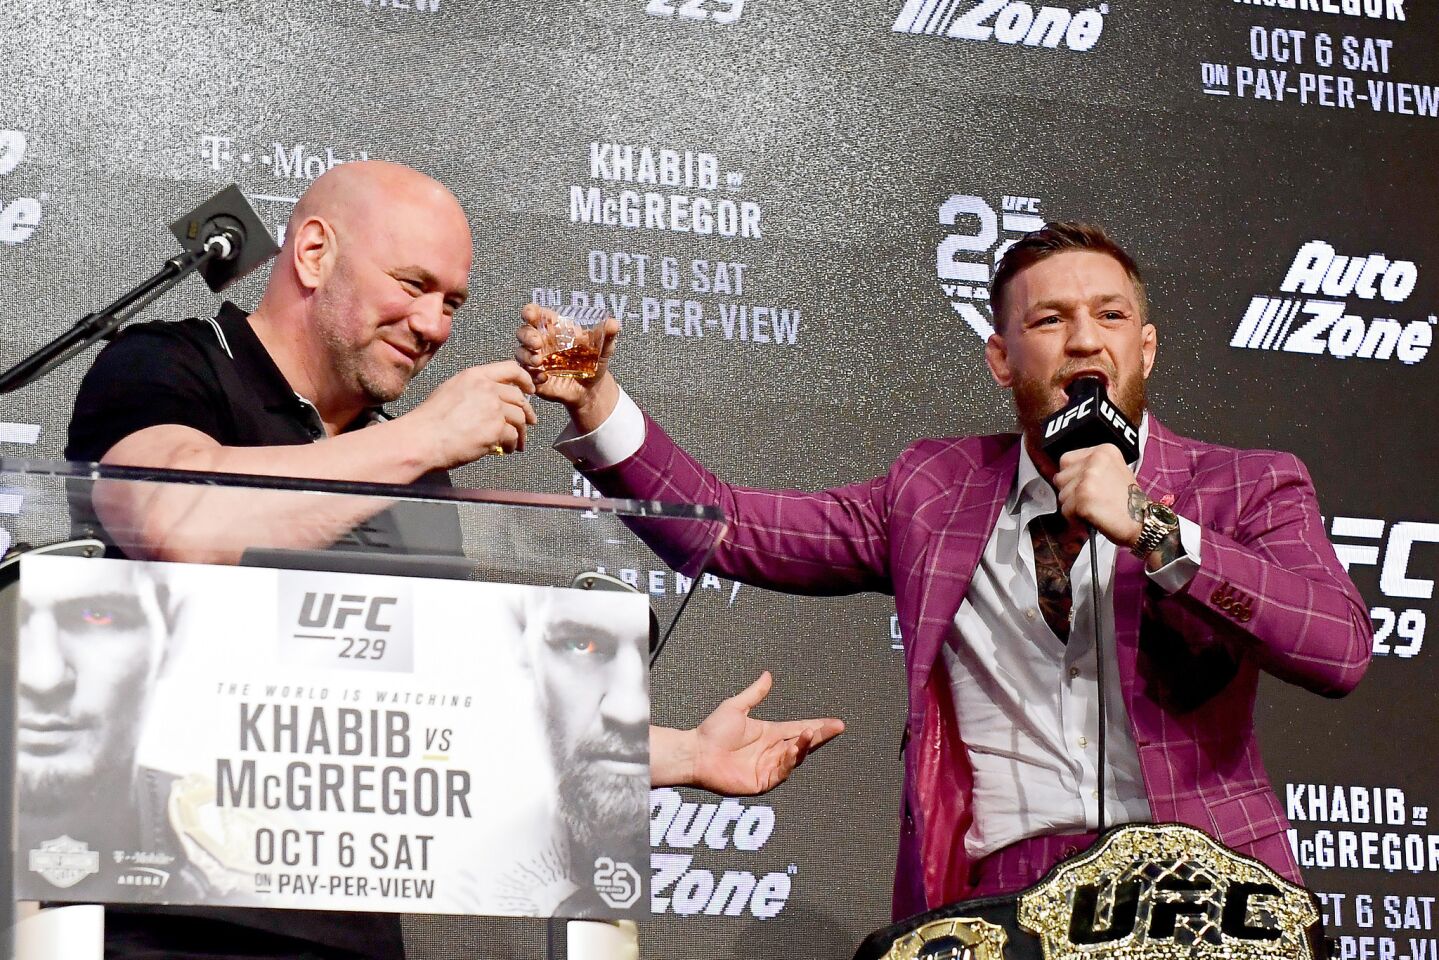 NEW YORK, NY - SEPTEMBER 20: Conor McGregor shares his Irish Whiskey with UFC President Dana White during the UFC 229 Press Conference at Radio City Music Hall on September 20, 2018 in New York City. (Photo by Steven Ryan/Getty Images) ** OUTS - ELSENT, FPG, CM - OUTS * NM, PH, VA if sourced by CT, LA or MoD **